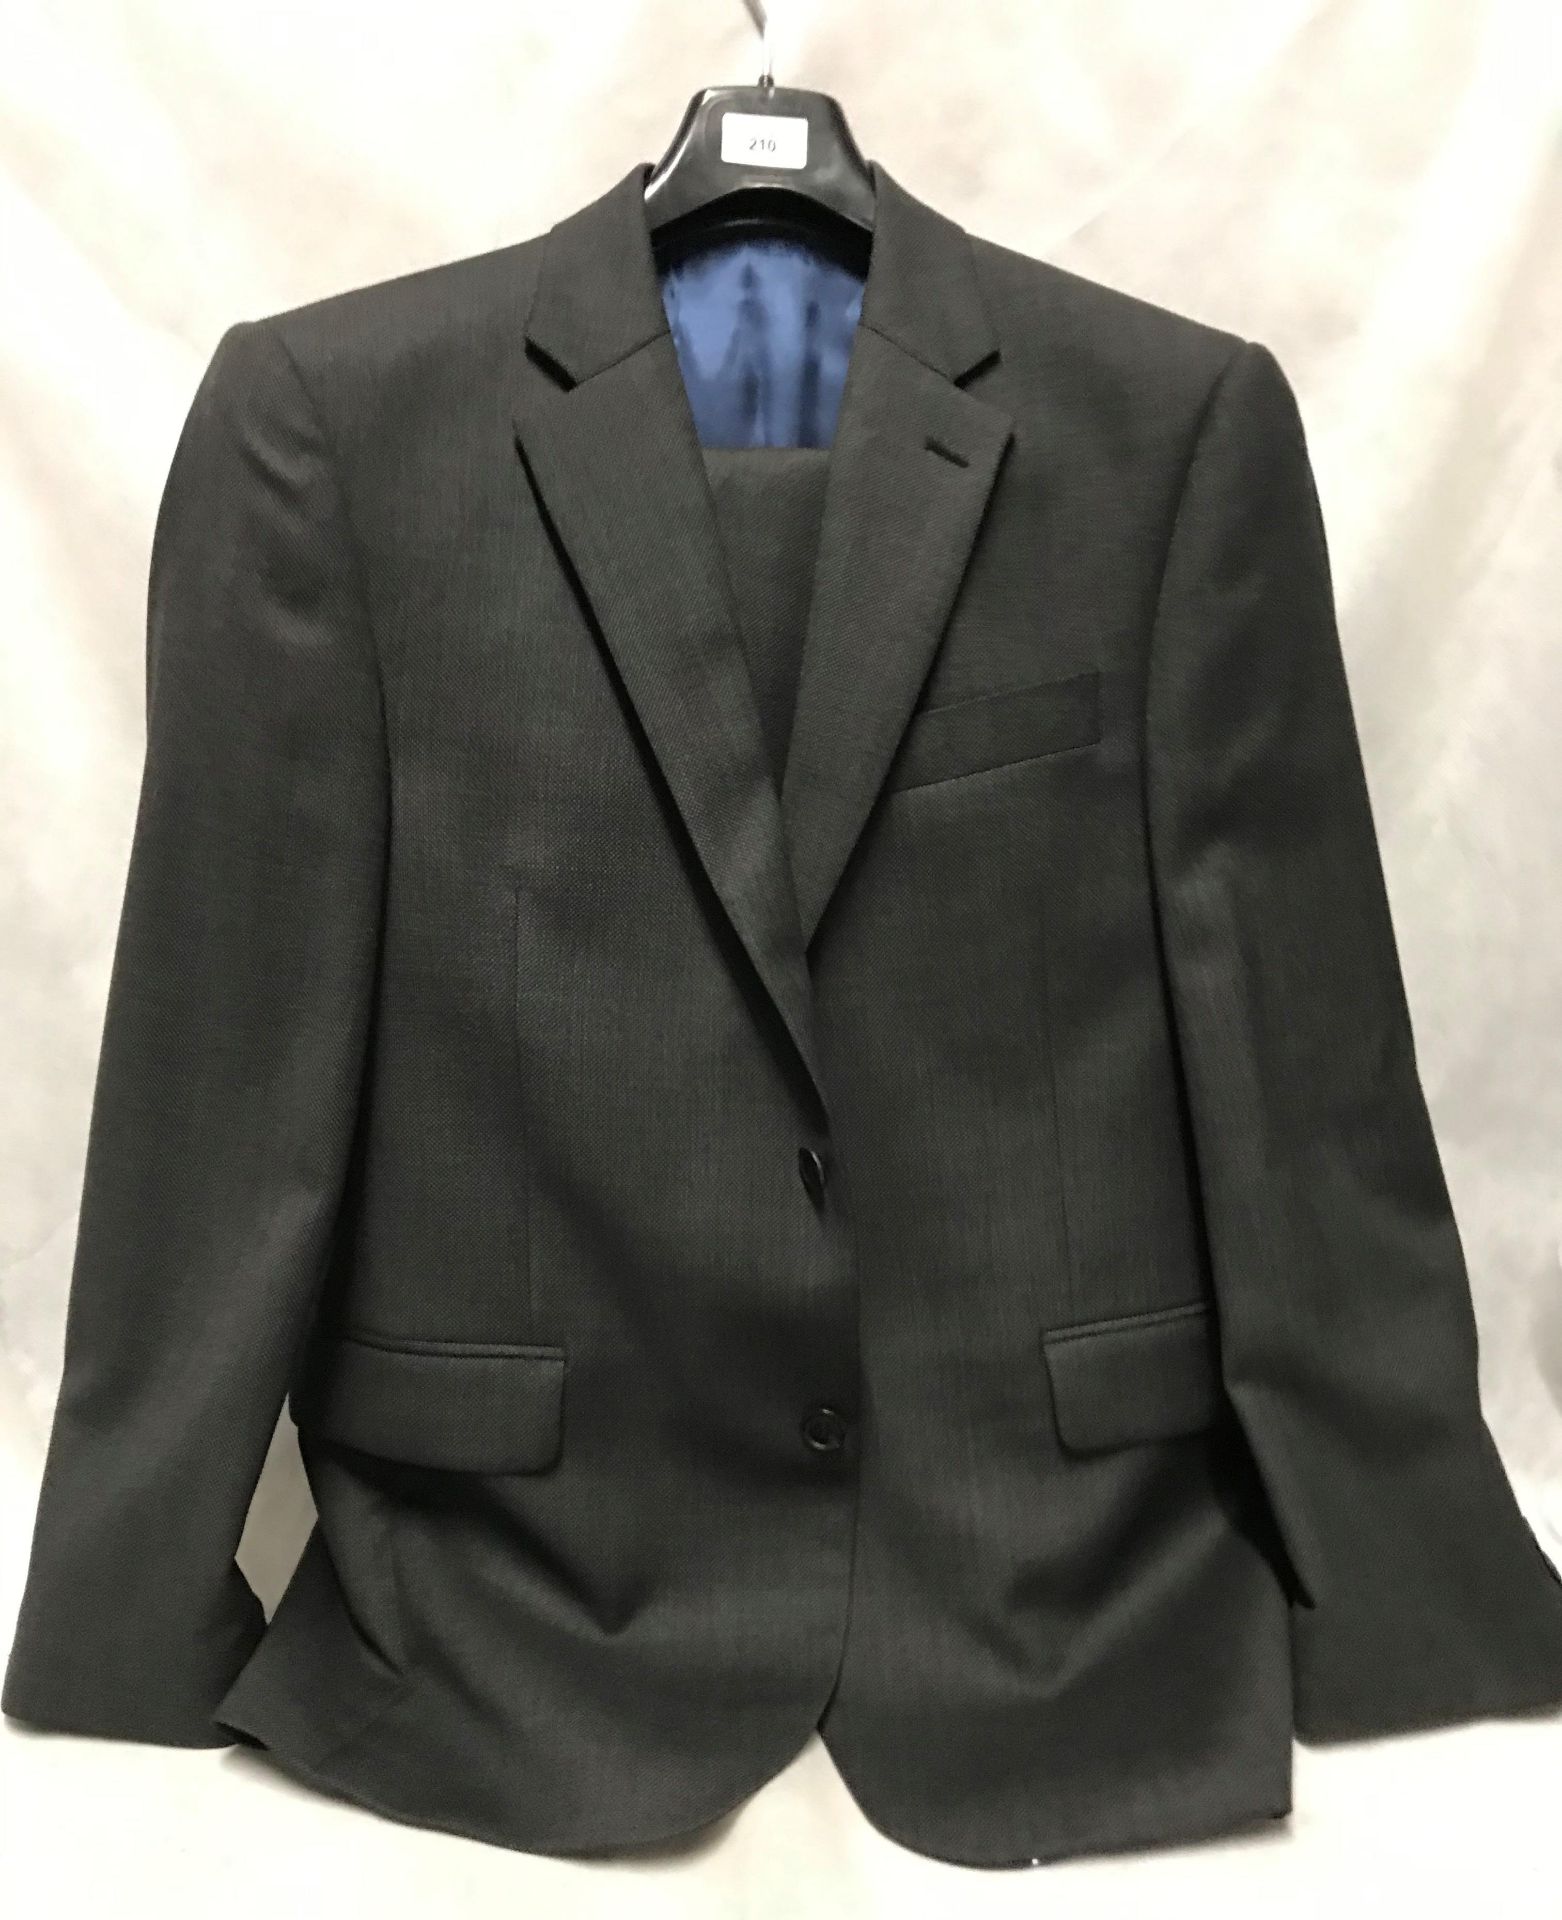 A charcoal grey two piece suit by John Lewis (trousers 34S,